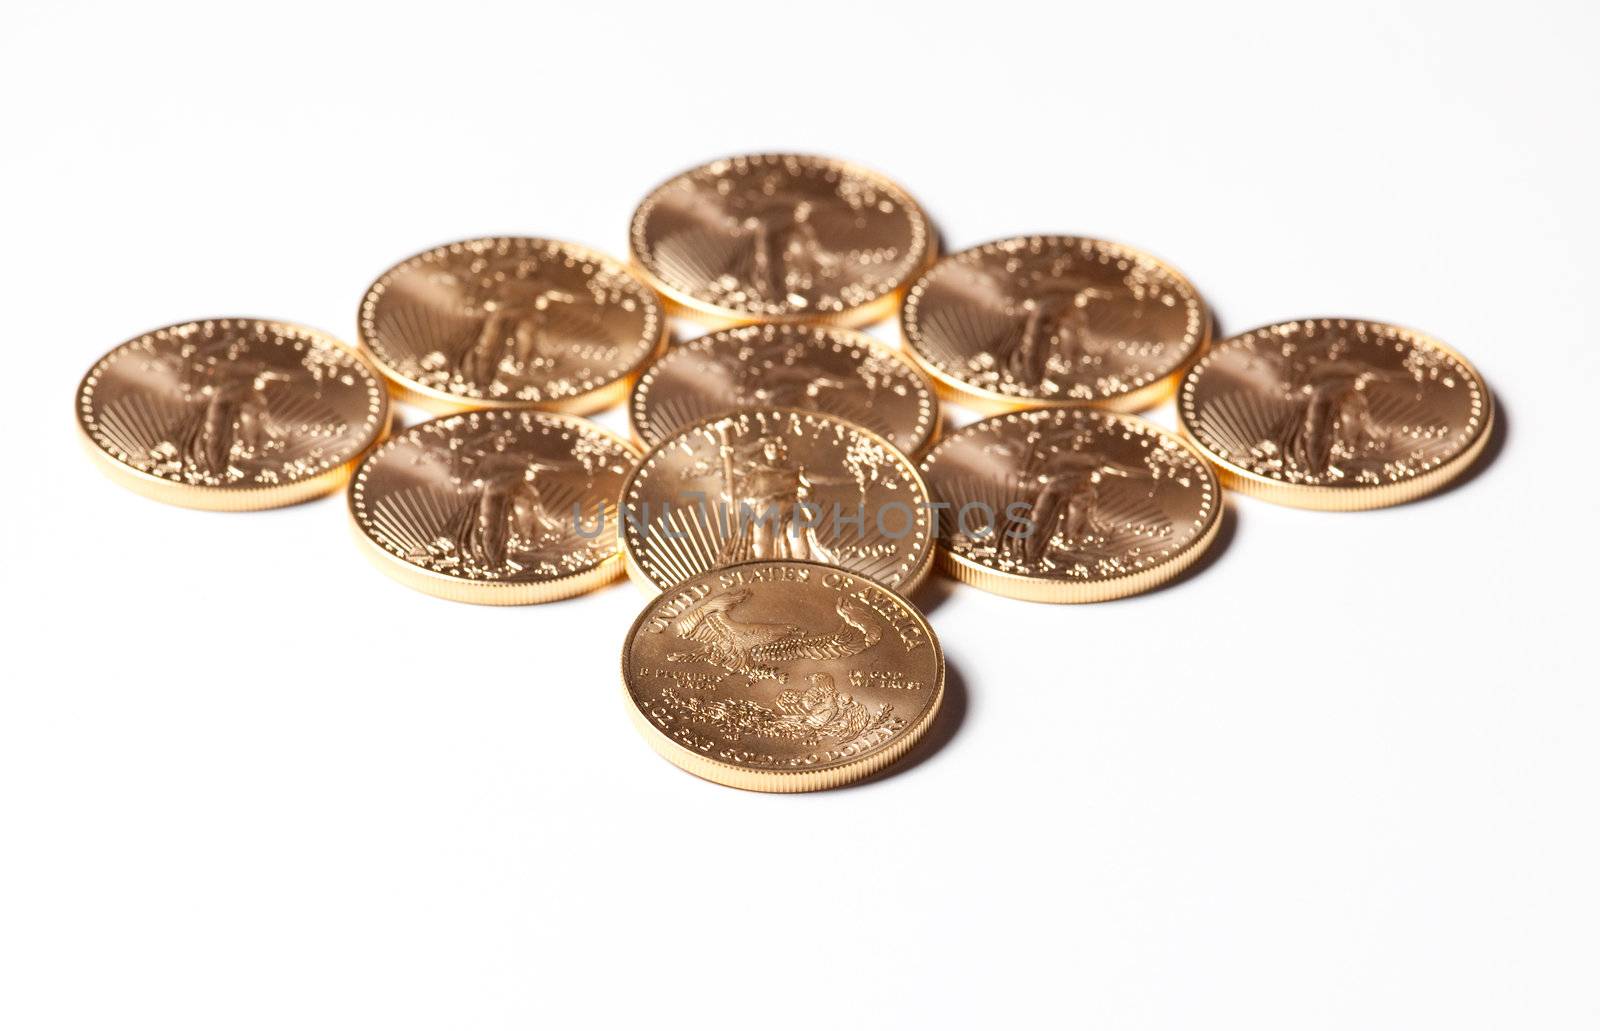 Diamond shaped gold coins on white by steheap